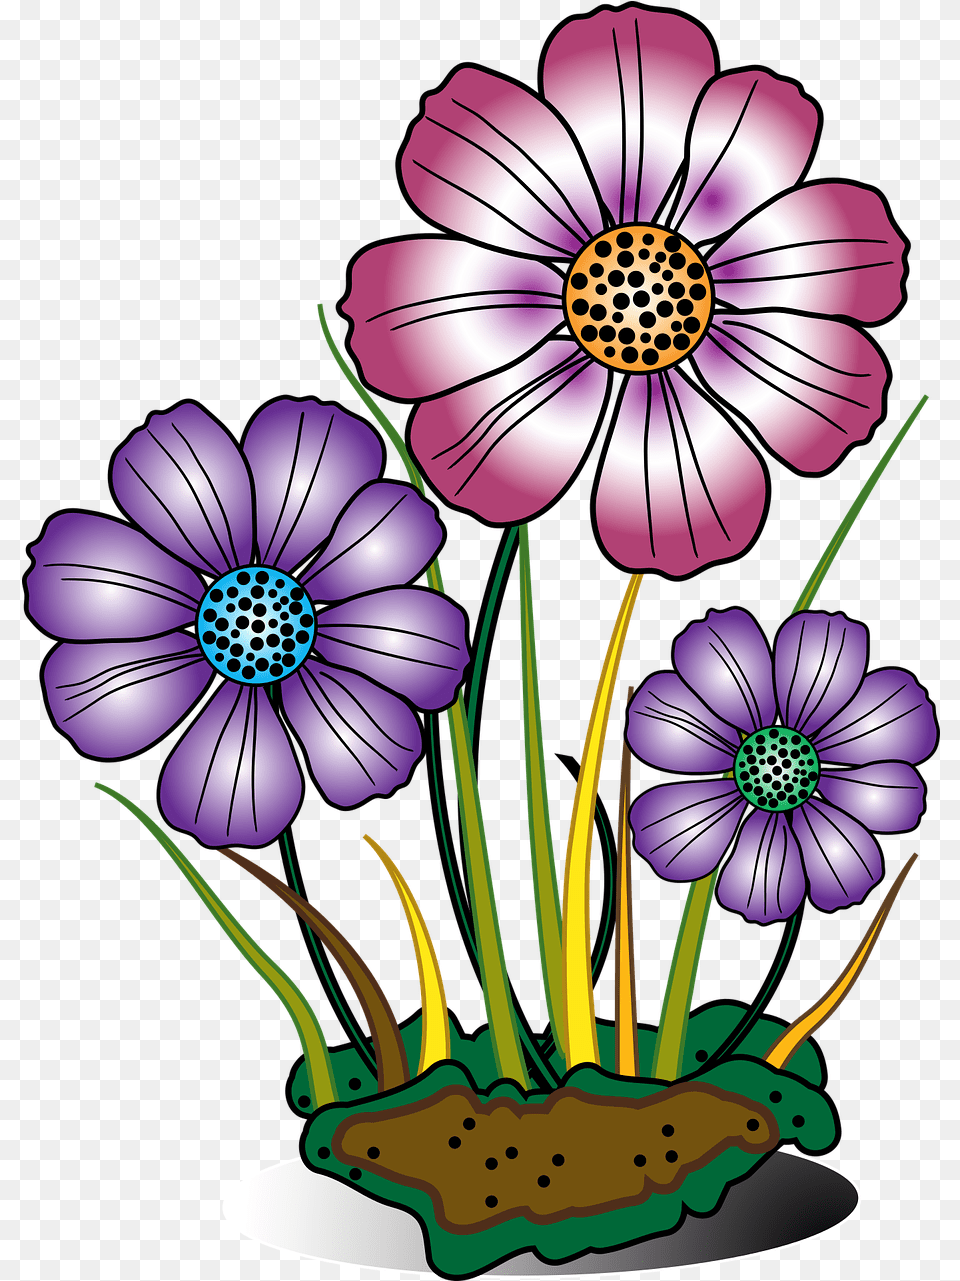 Decorative Flower Flowers Grass Flowers In Bloom Clipart, Anemone, Plant, Daisy, Anther Free Transparent Png